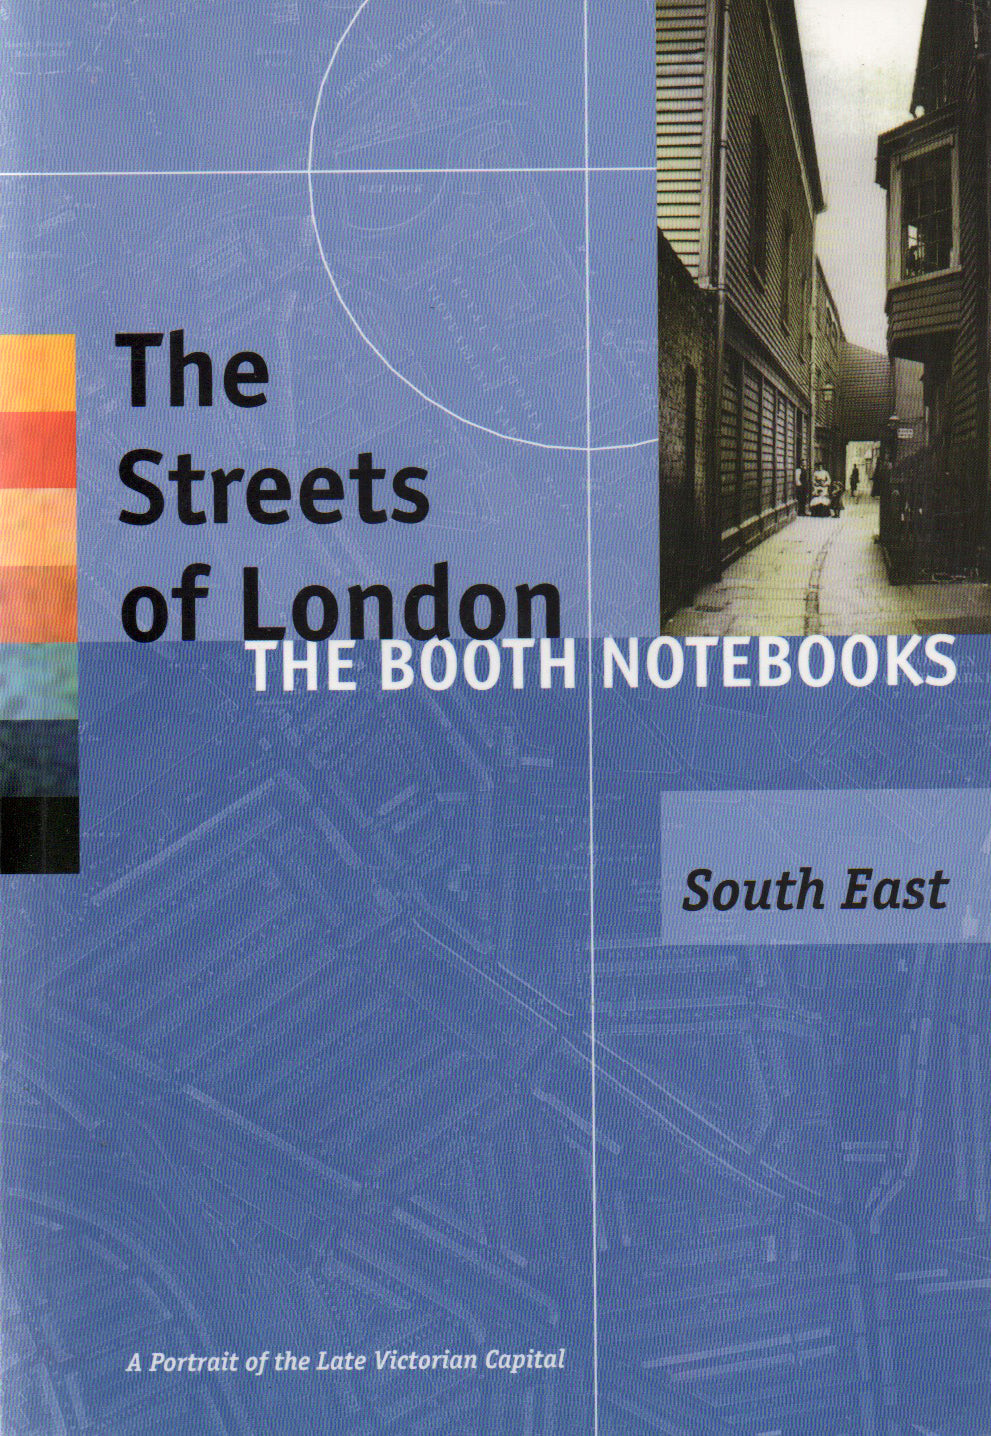 the streets of london - the booth notebooks - south east